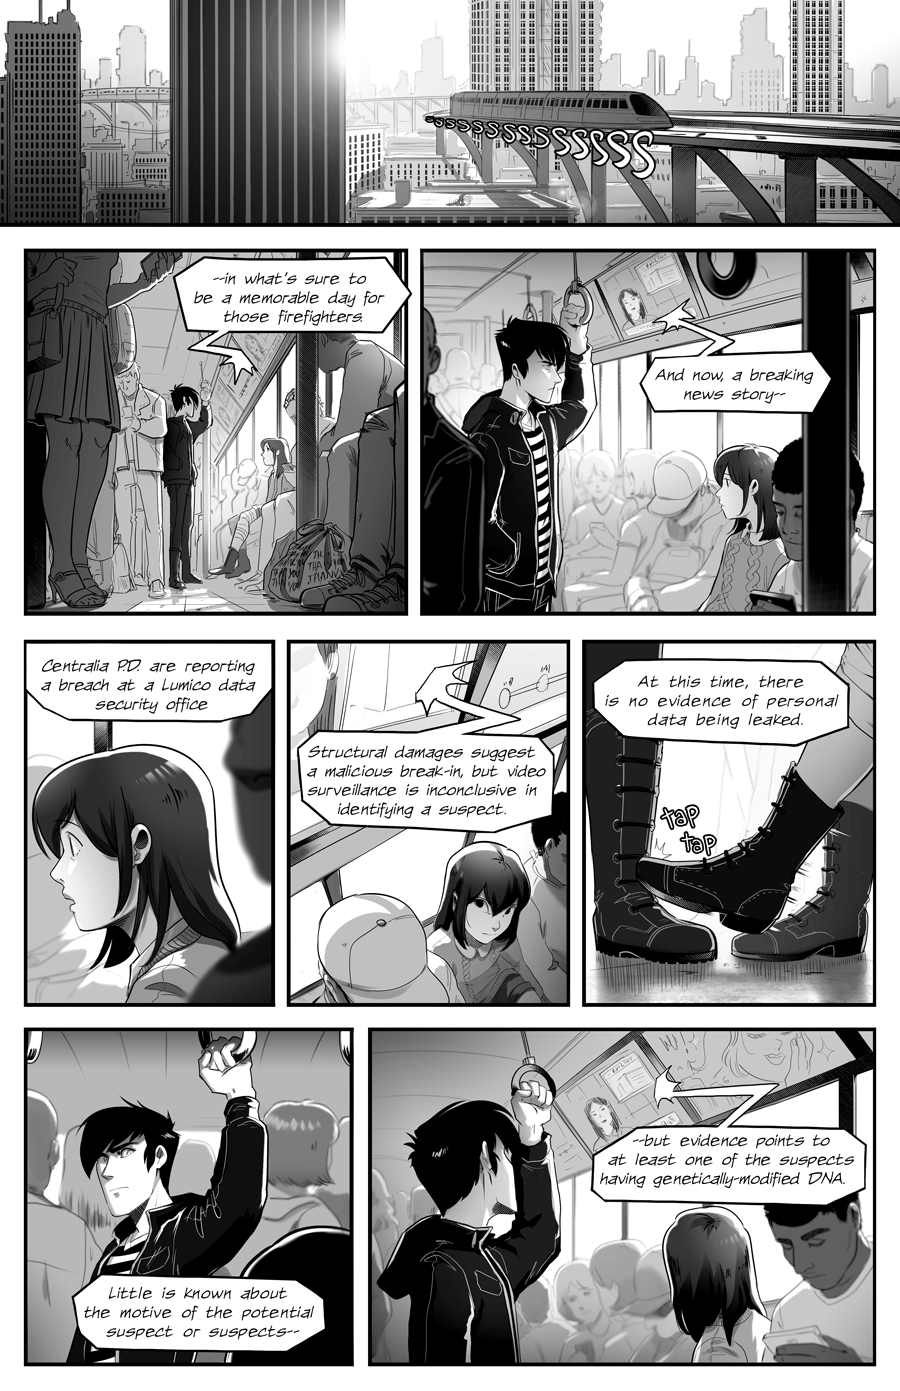 Centralia 2050 chapter 5 page 26